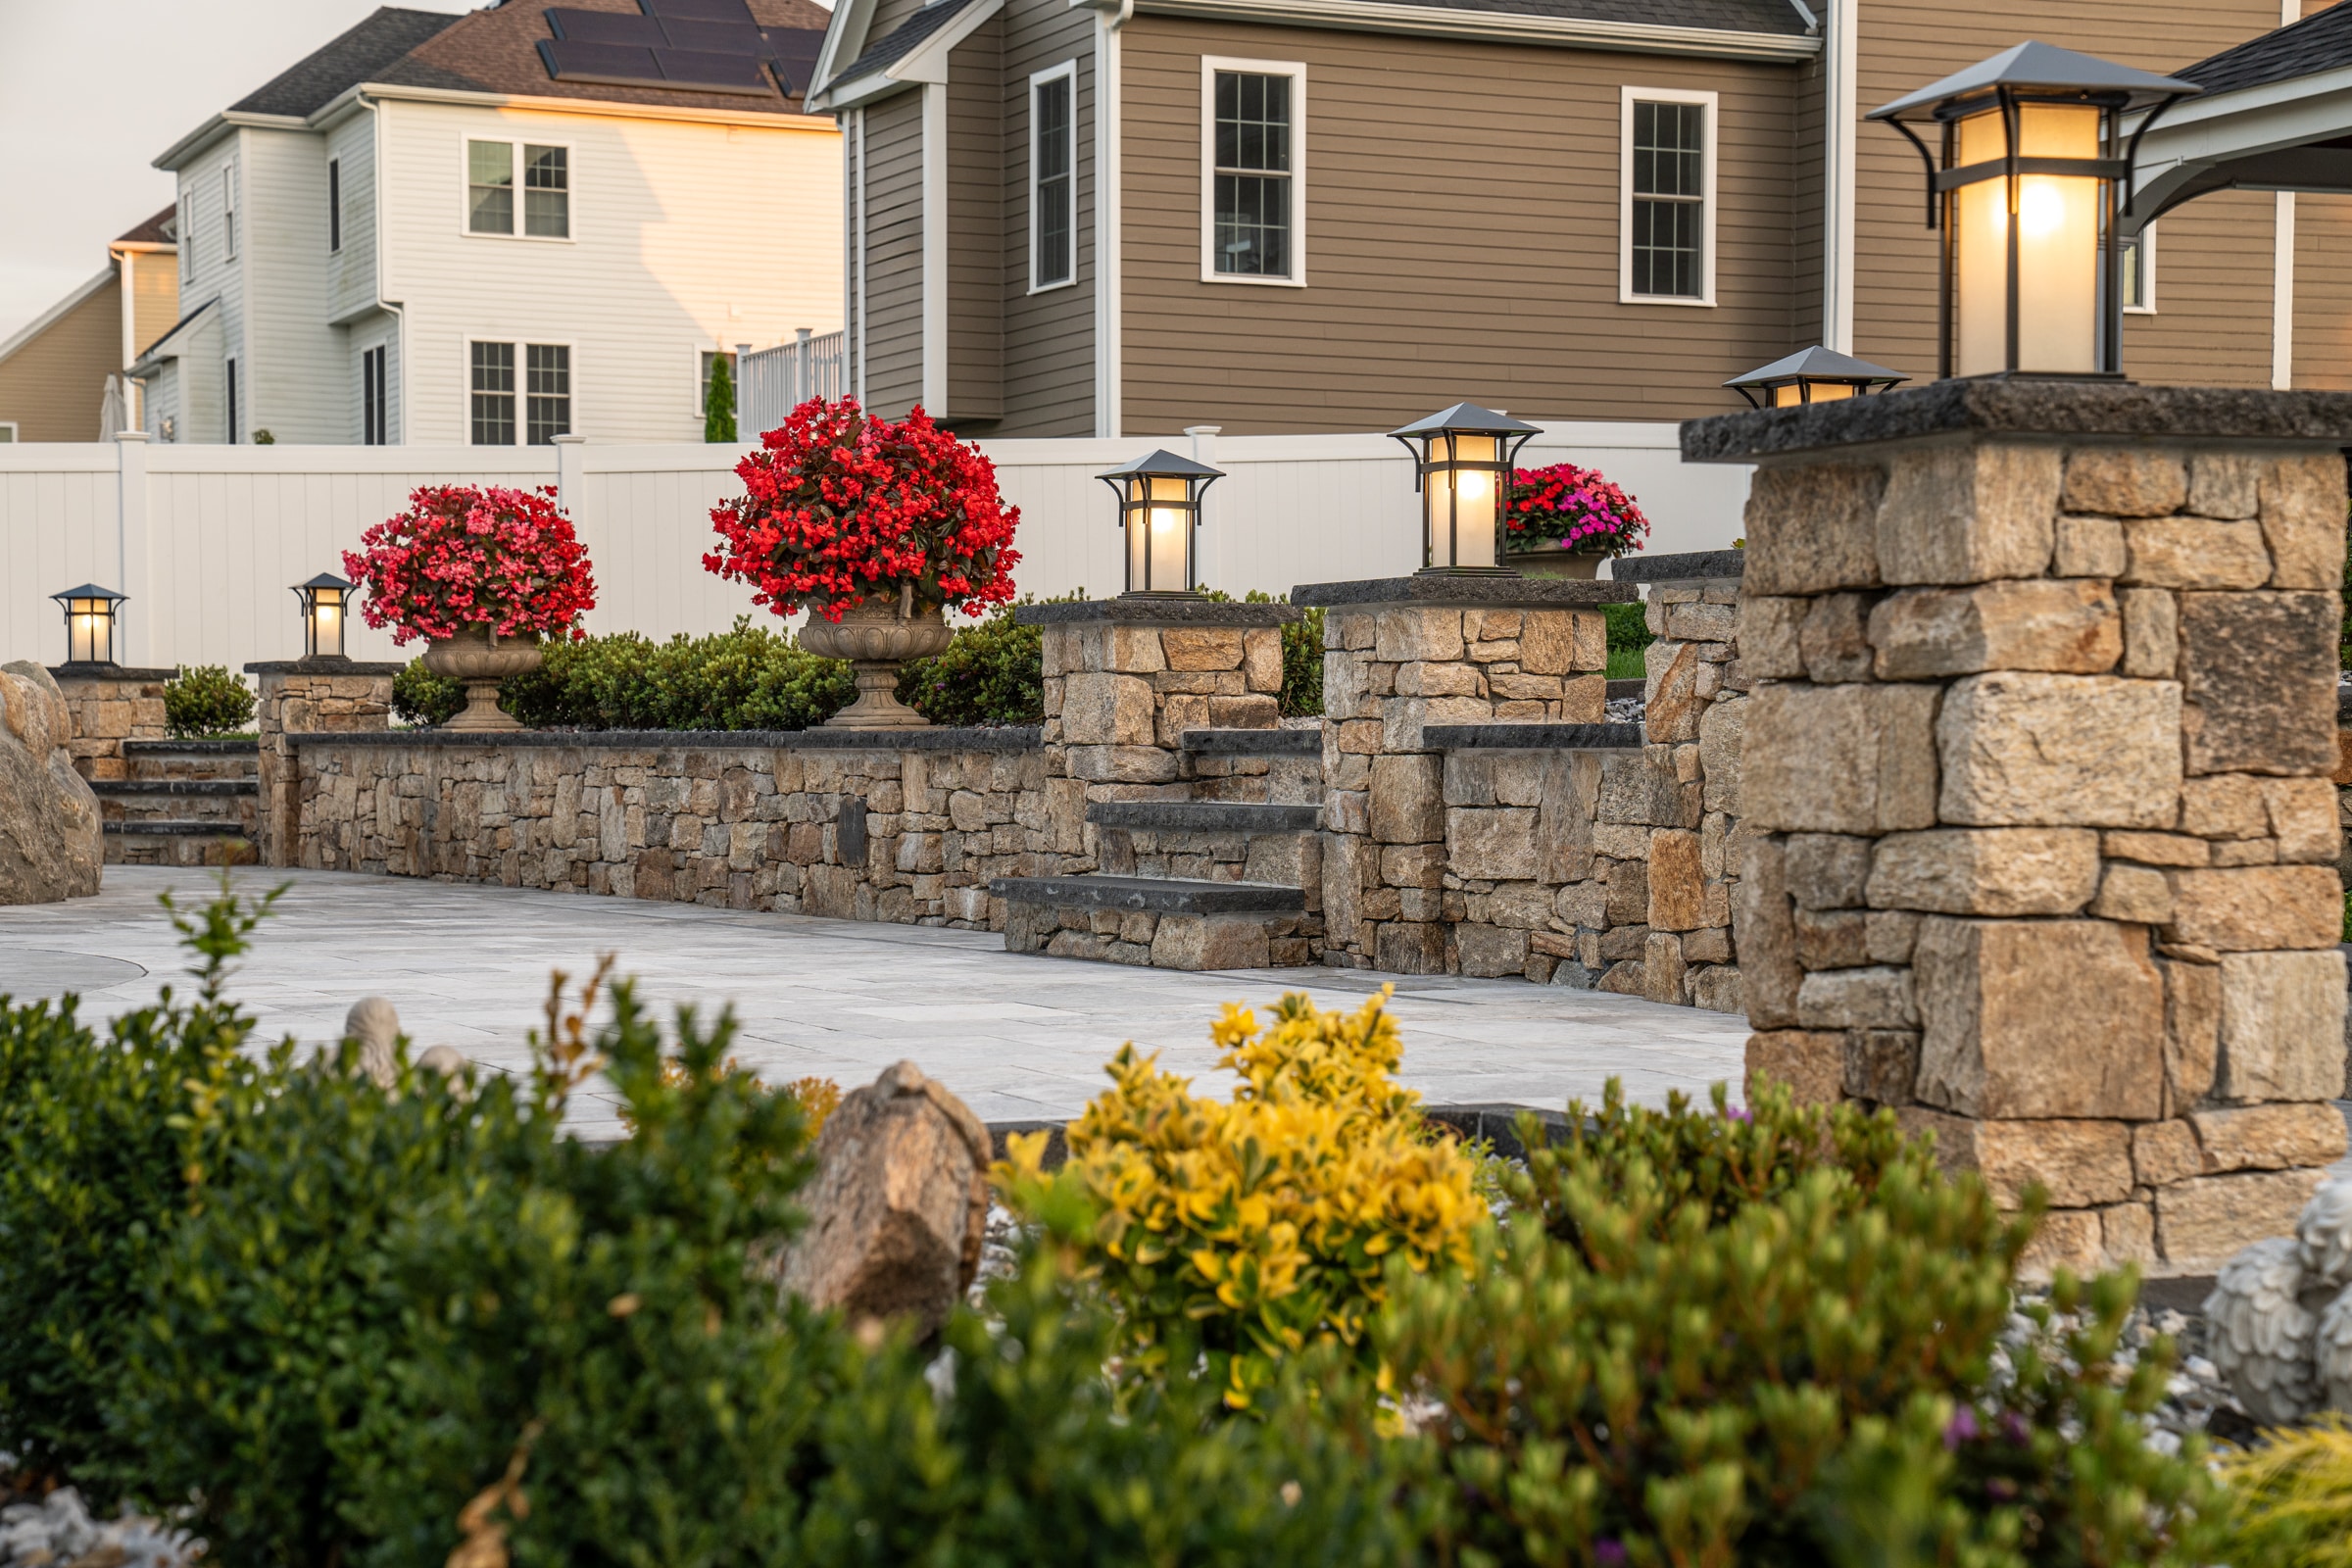 Walls, columns, and steps were built with stone veneer and stone caps. Landscaping and hardscaping project by Dex by Terra.